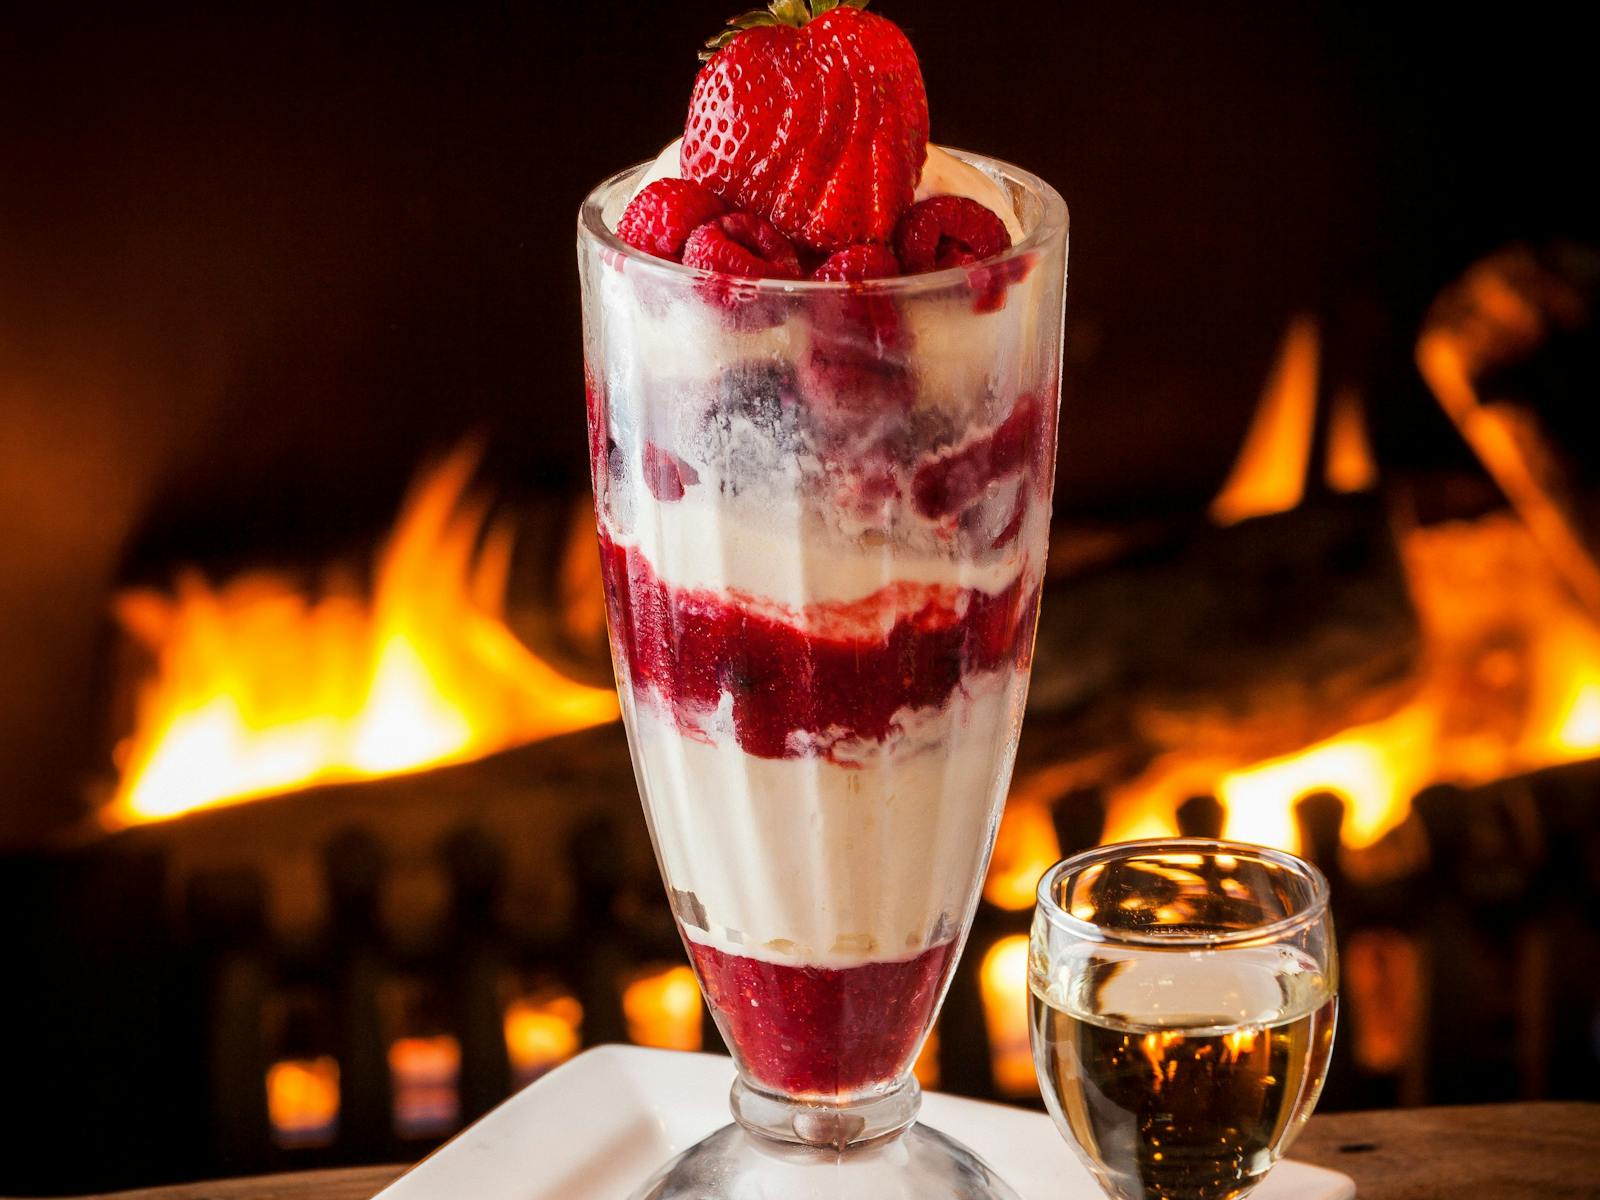 fresh berries and icecream enjoyed by the fire